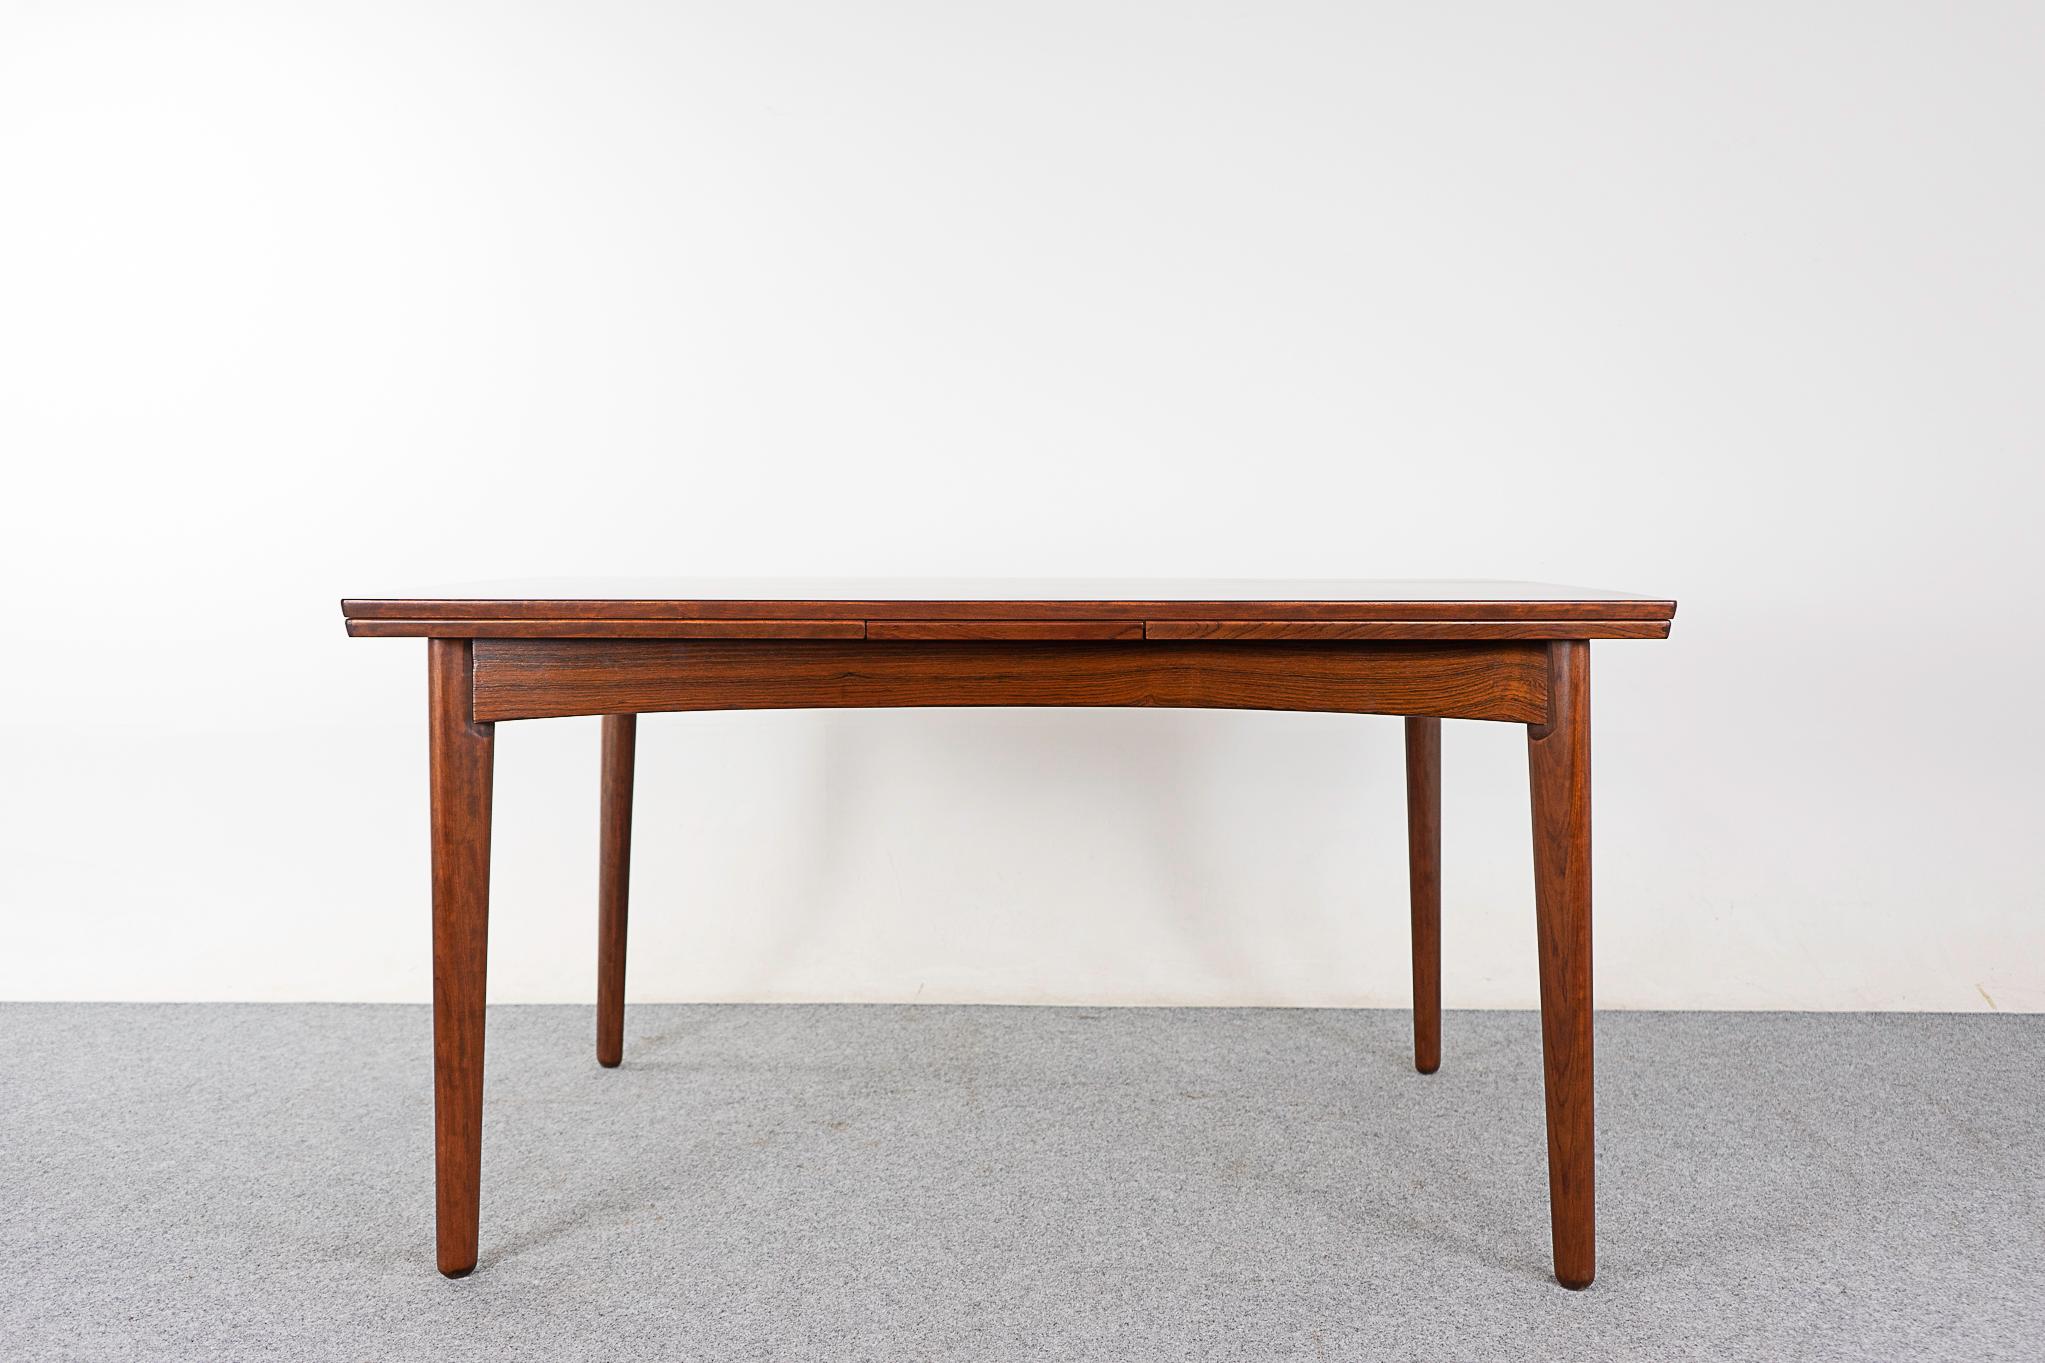 Rosewood Danish dining table, circa 1960's. Gentle curved edge and lovely grain patterns. Unique legs and self-storing leaves that slide out from each end to expand when needed.

Please inquire for remote and international shipping rates.